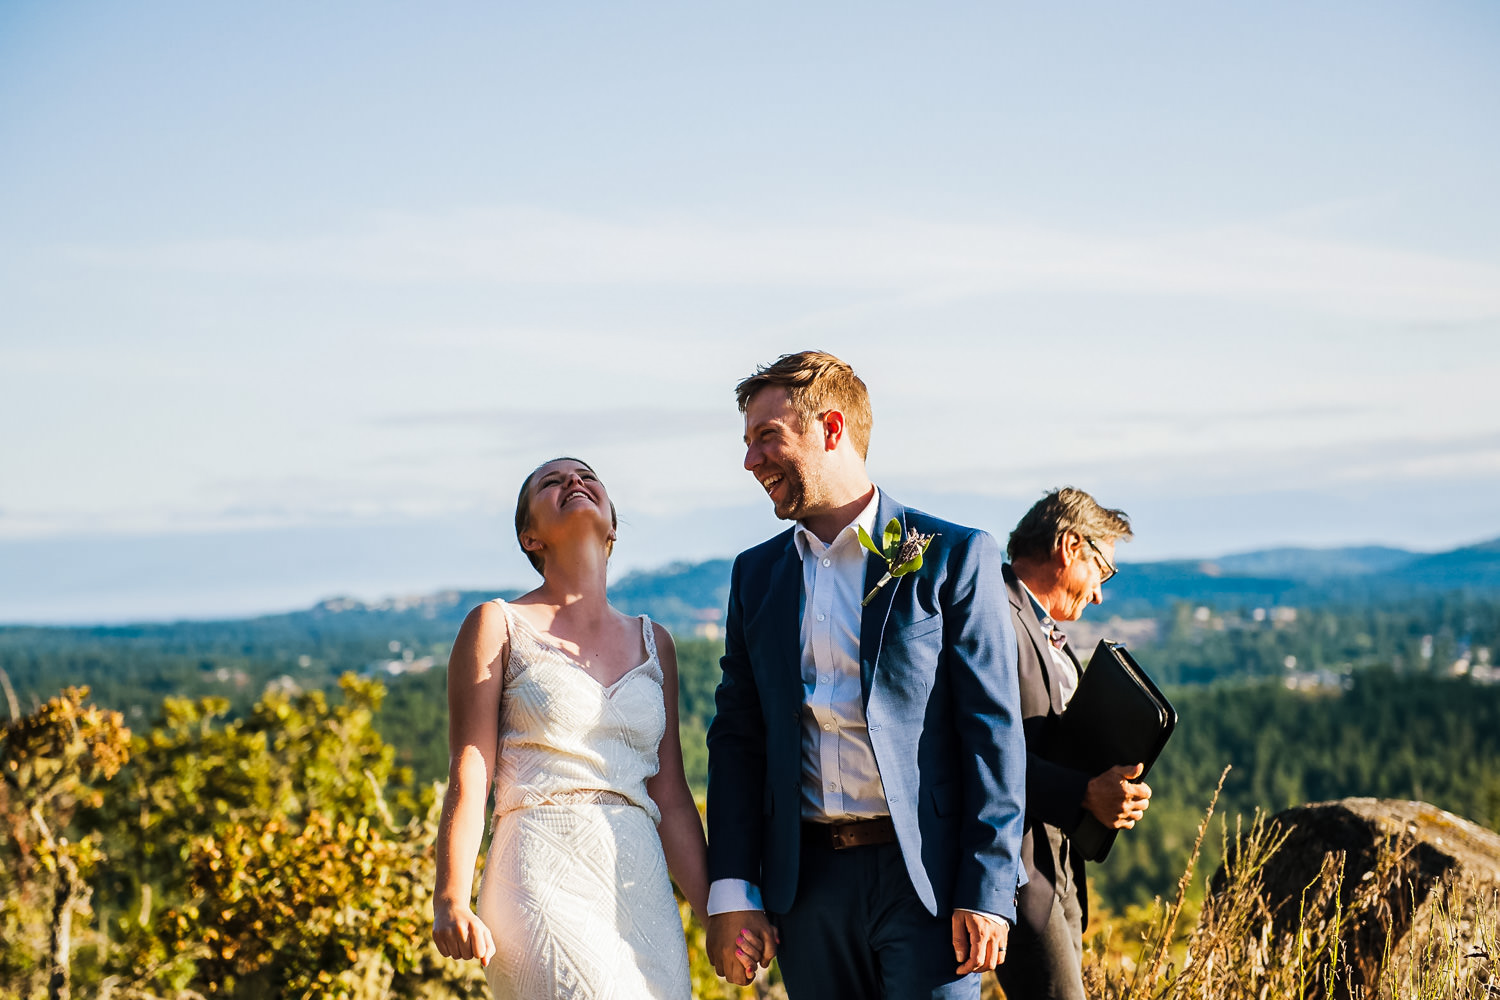 A fun pop-up hiking wedding at Thetis Lake Regional Park in Victoria BC